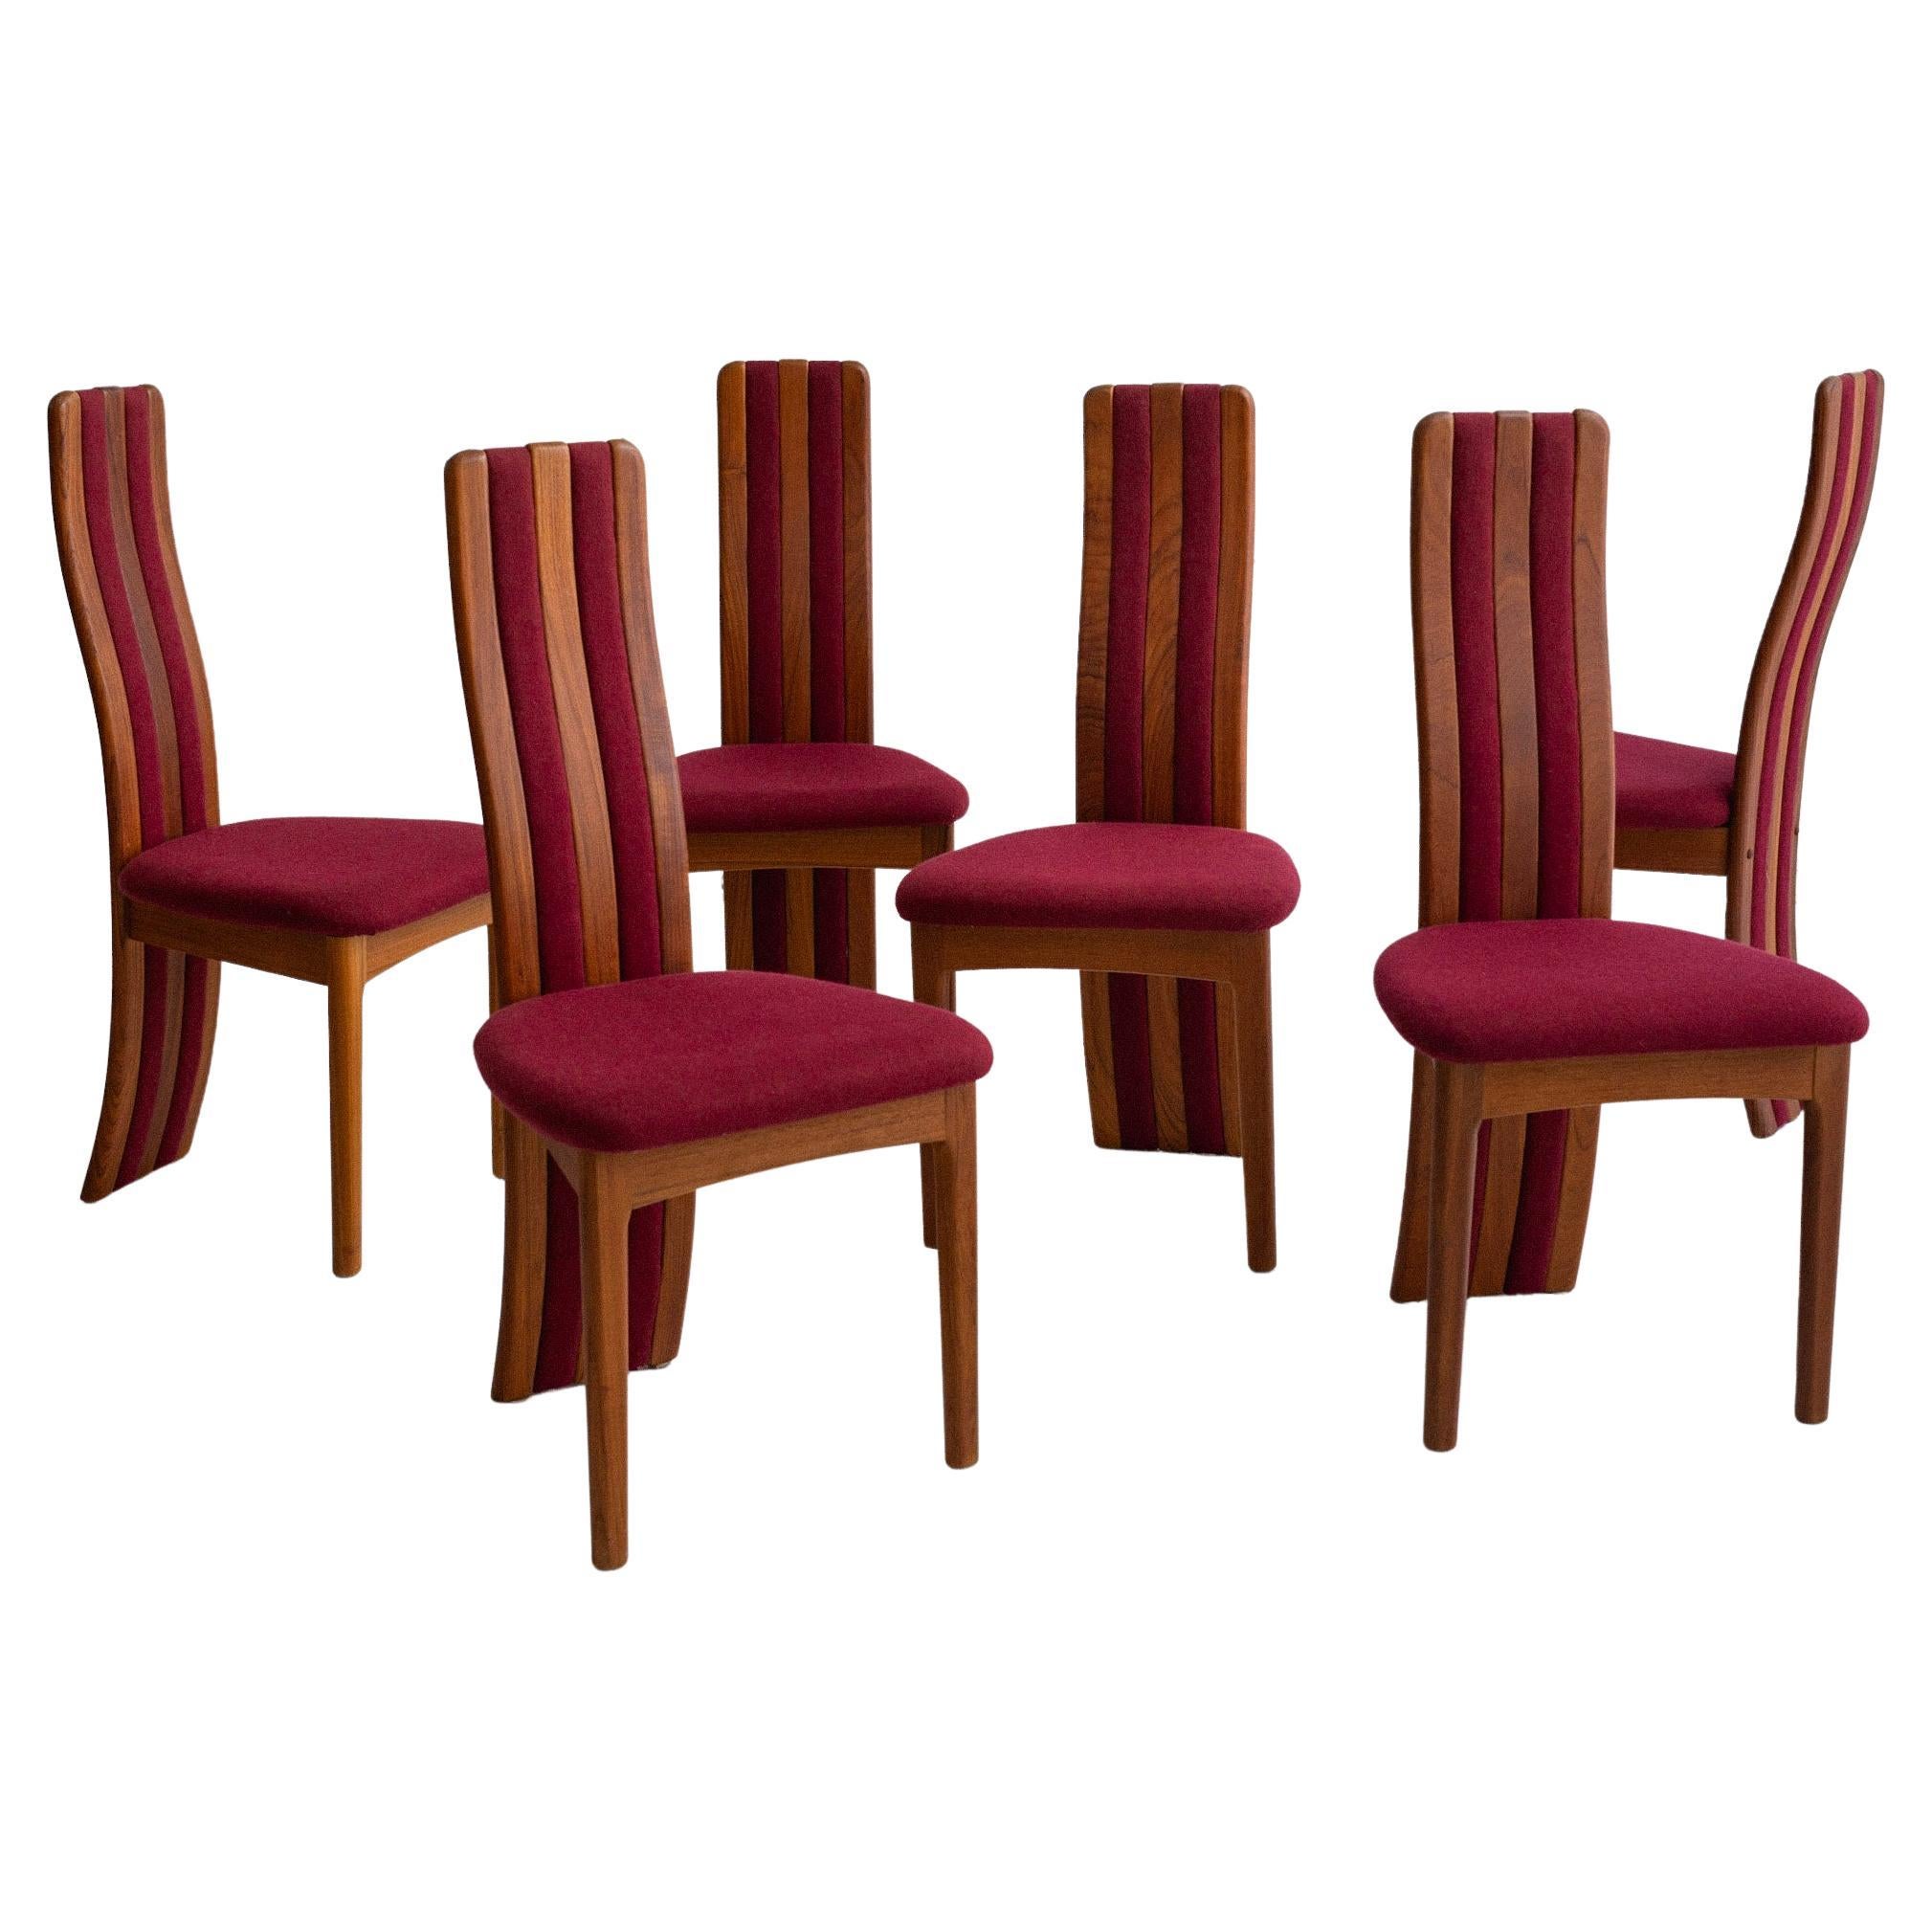 Post Modern Sculpted Teak Dining Chairs by Benny Linden - a Set of 6